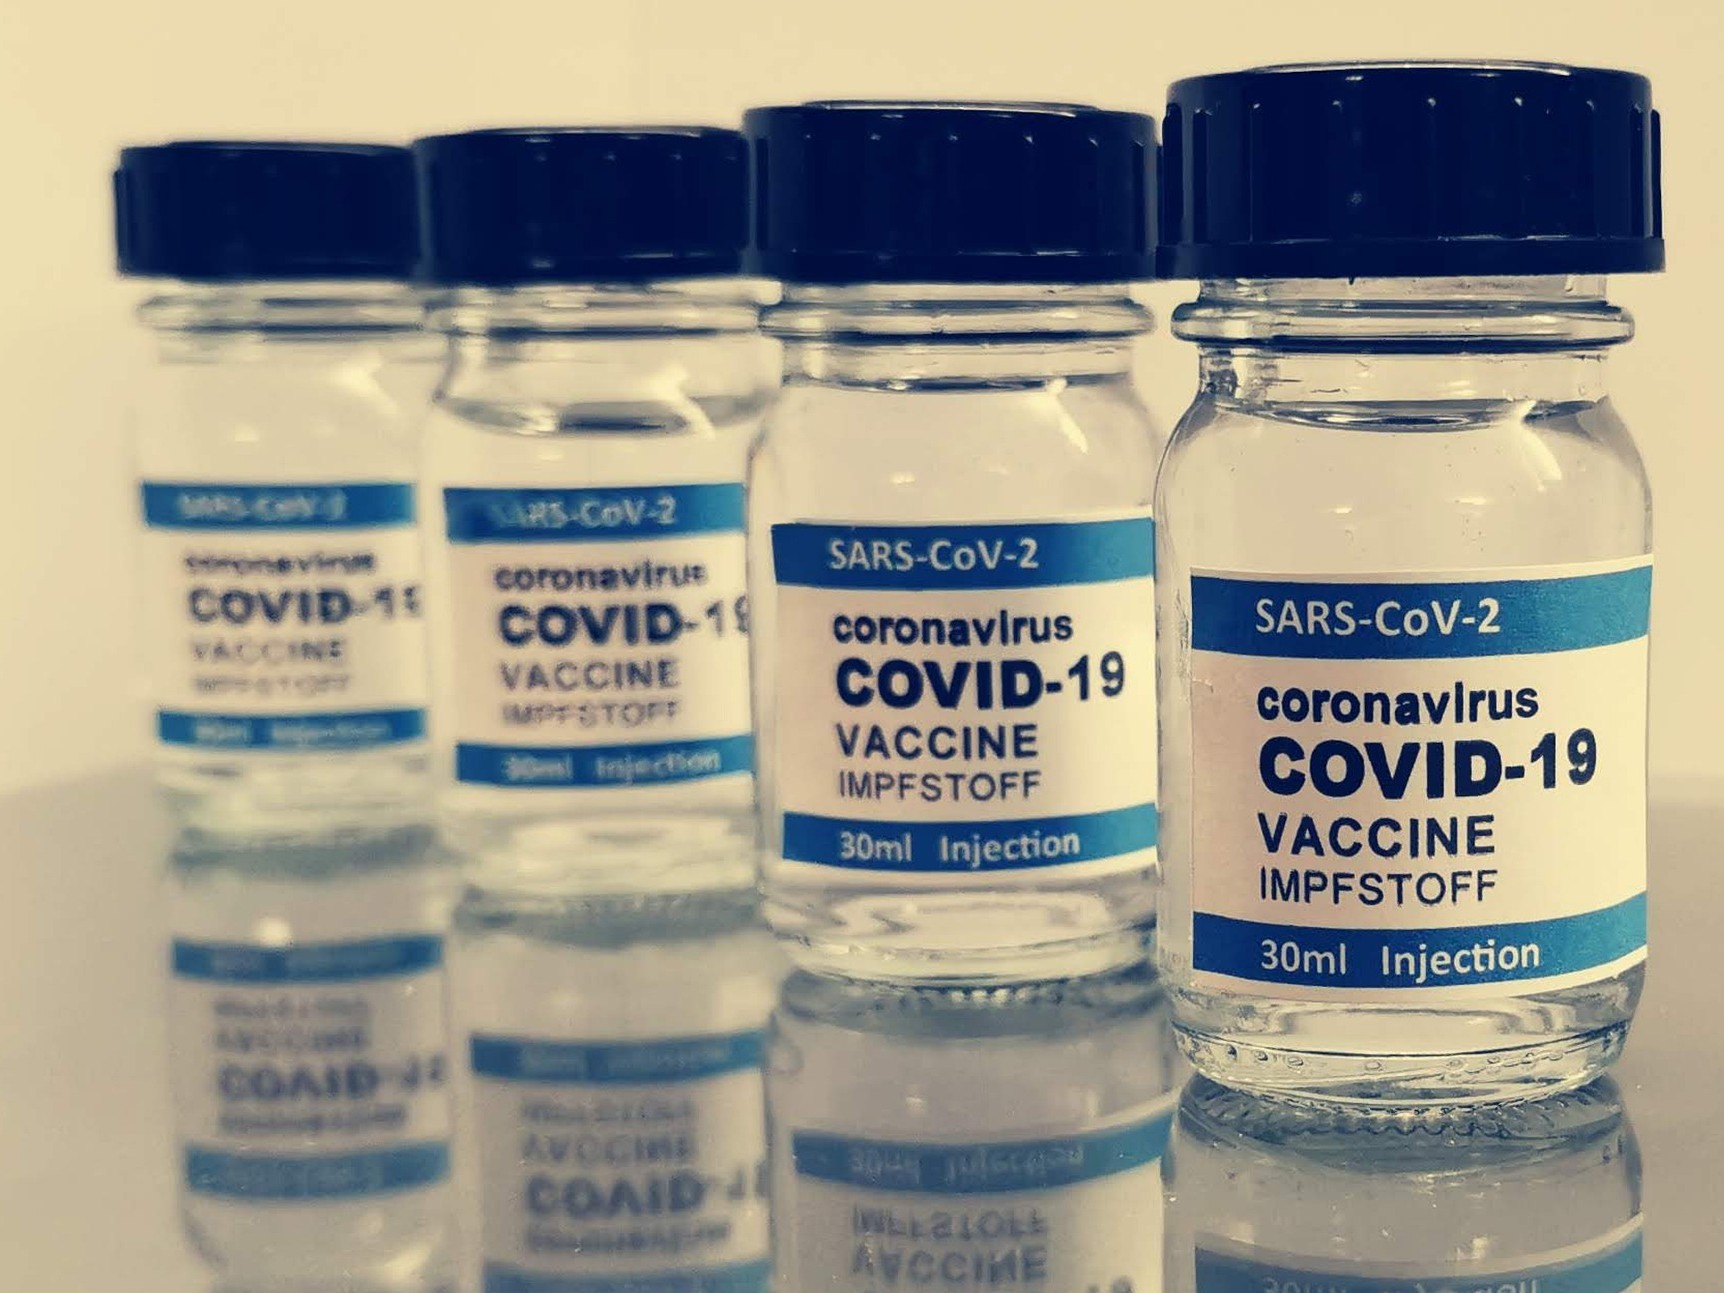 The US joined the push to waive COVID-19 vaccine patents. Will it actually help?